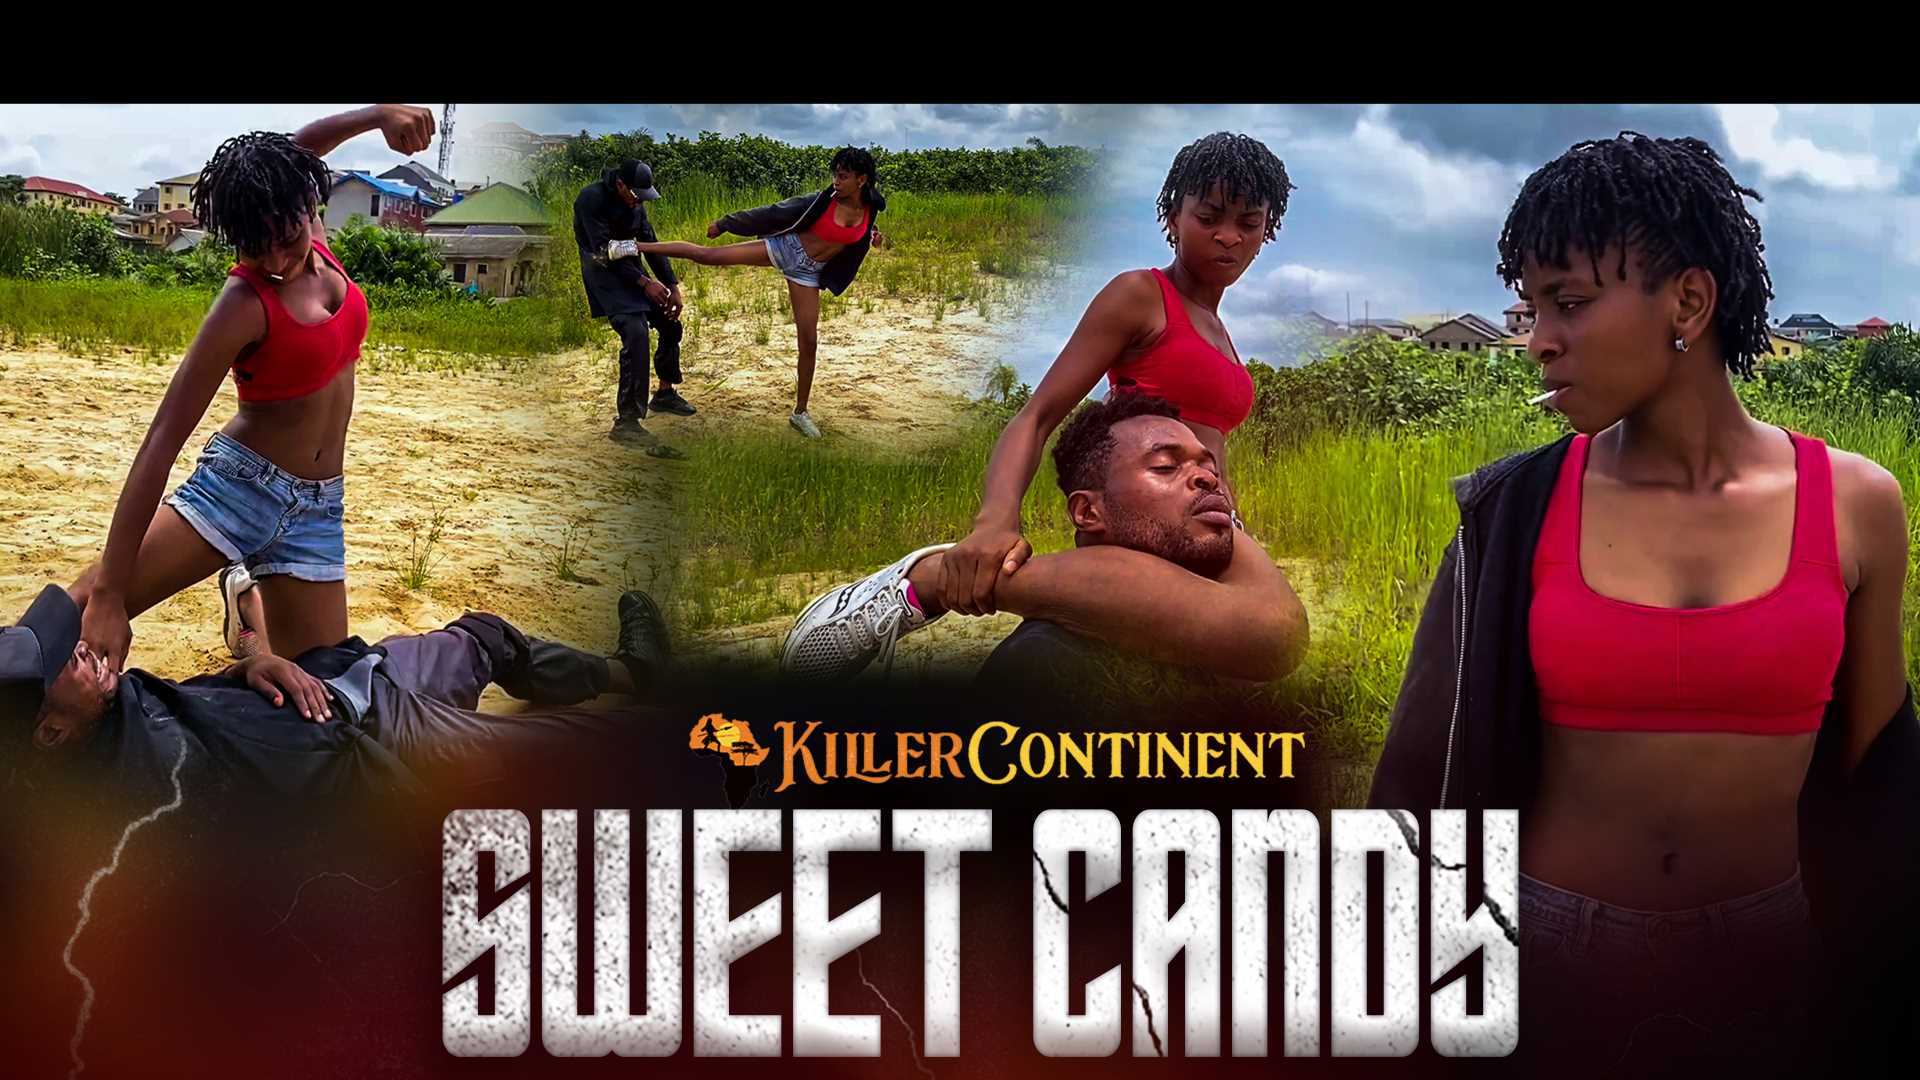 #1 - Sweet Candy